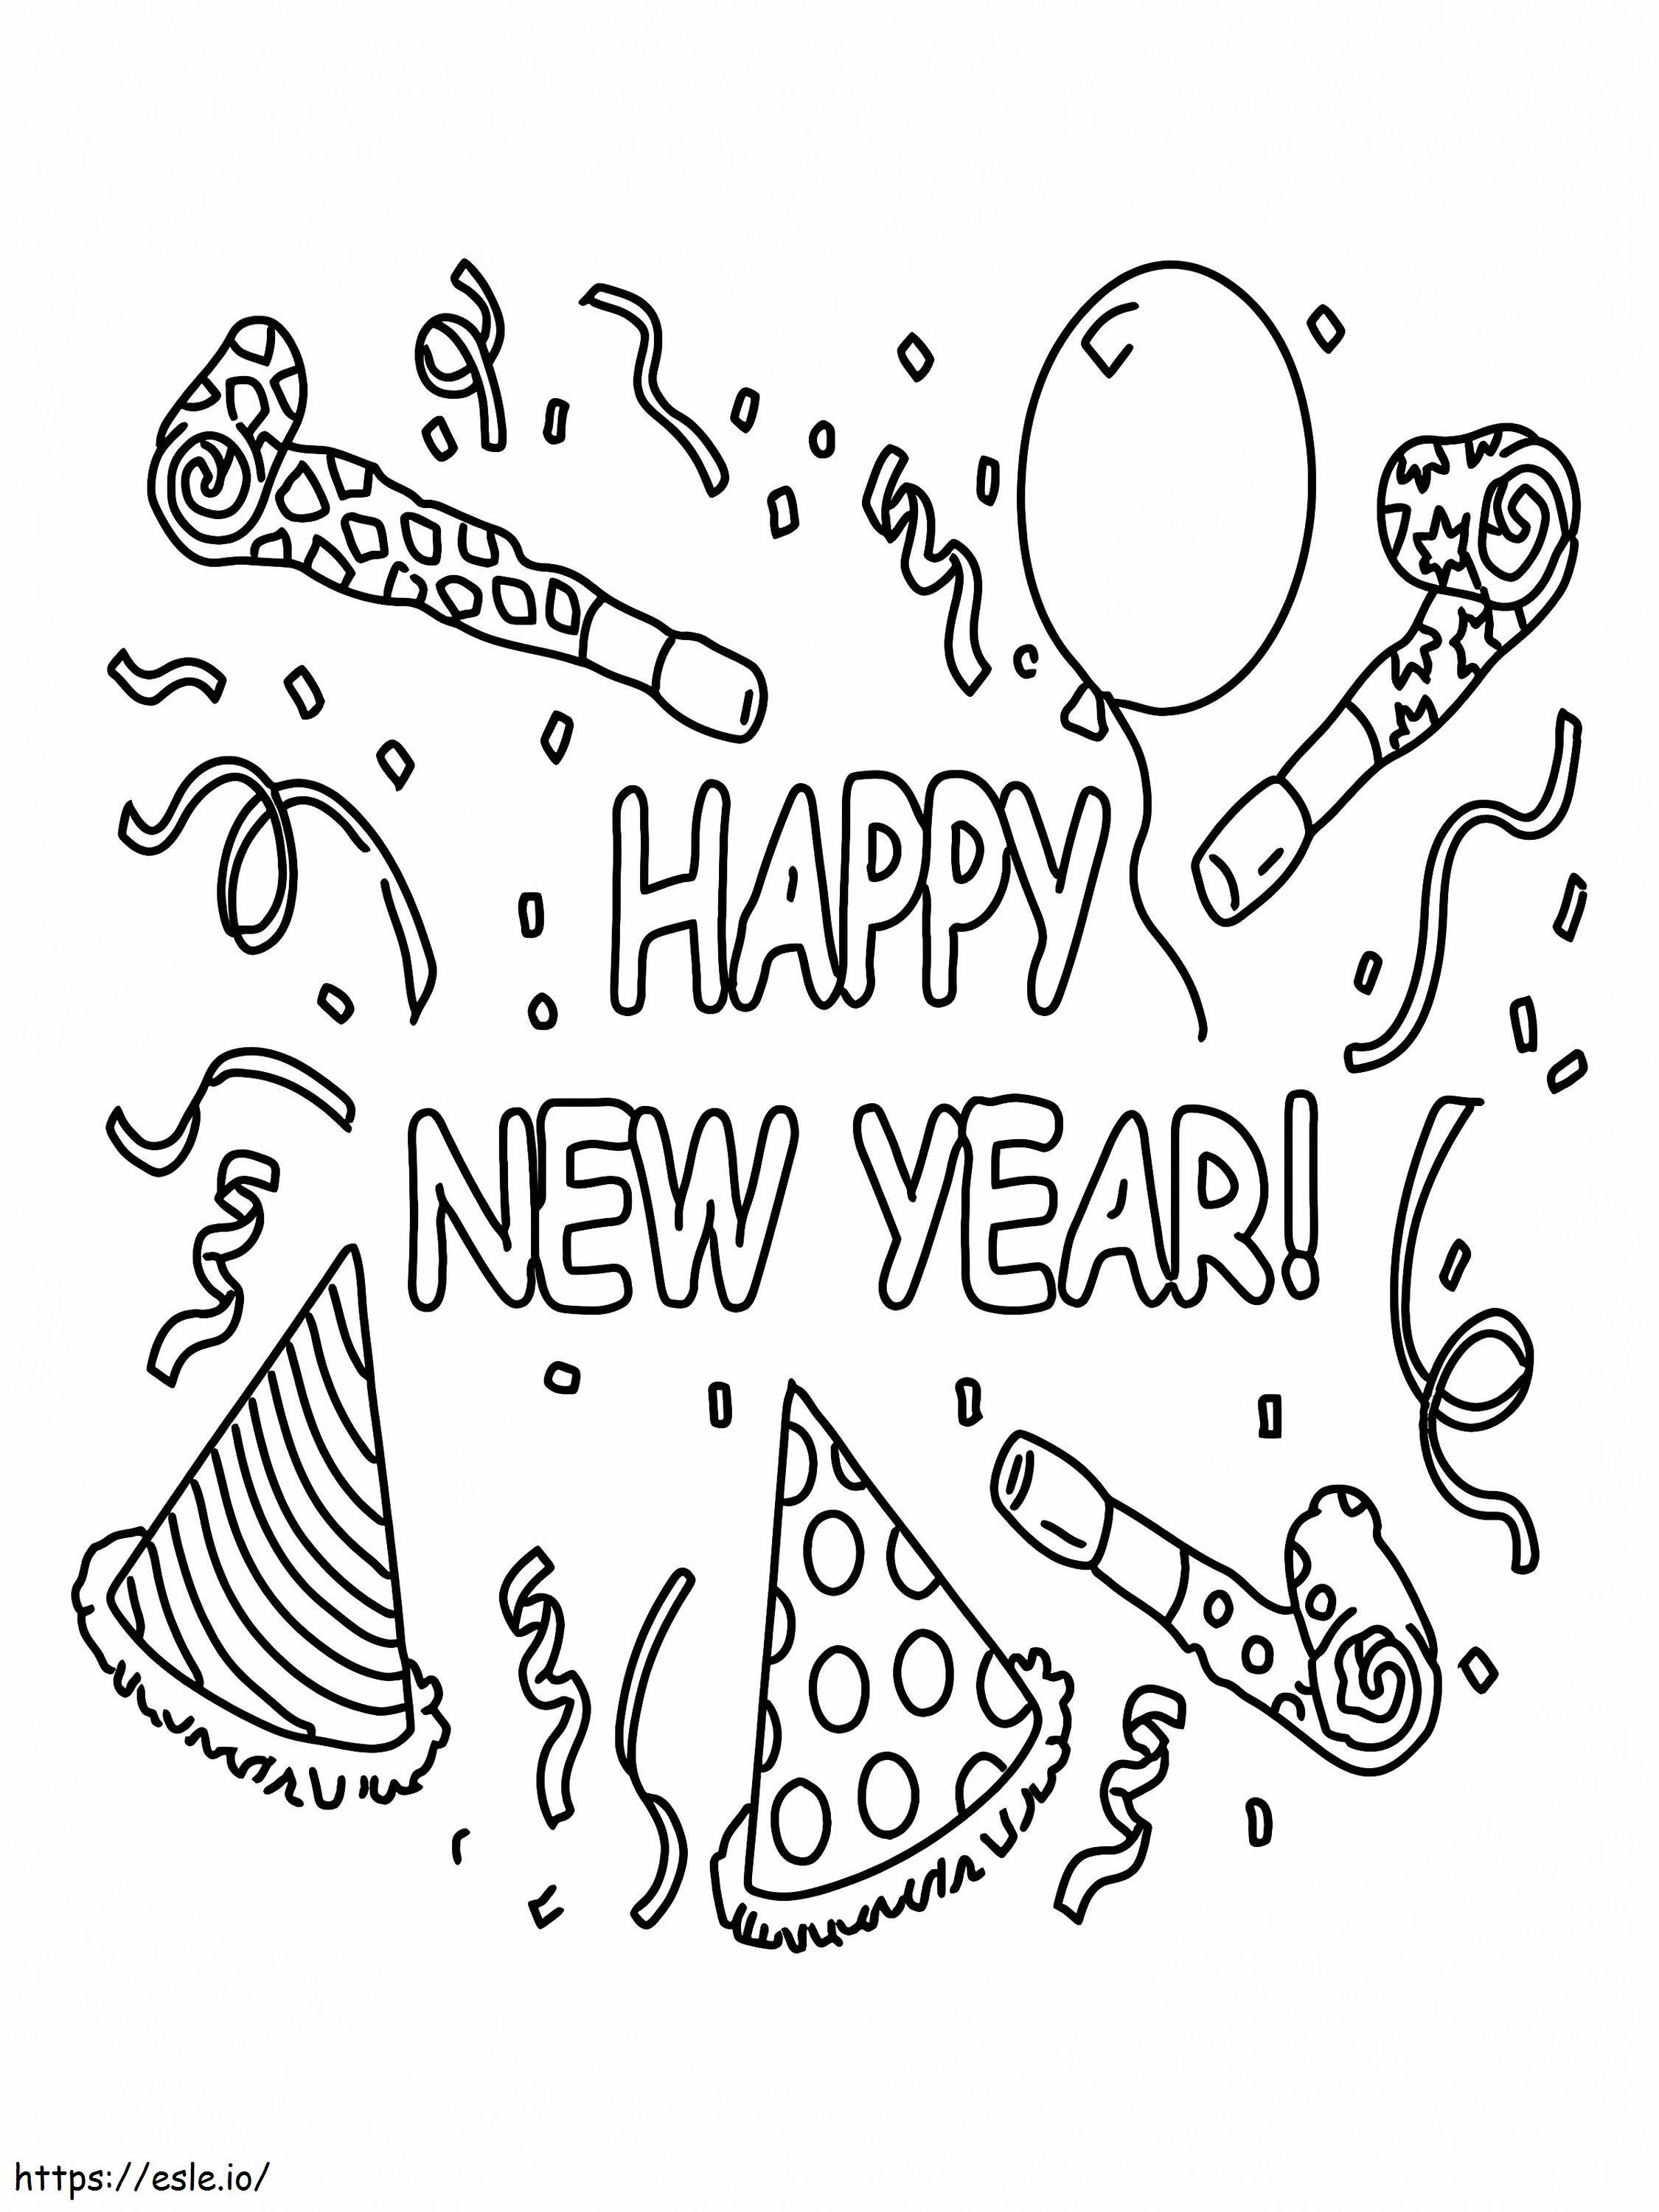 Happy New Year Coloring 1 coloring page